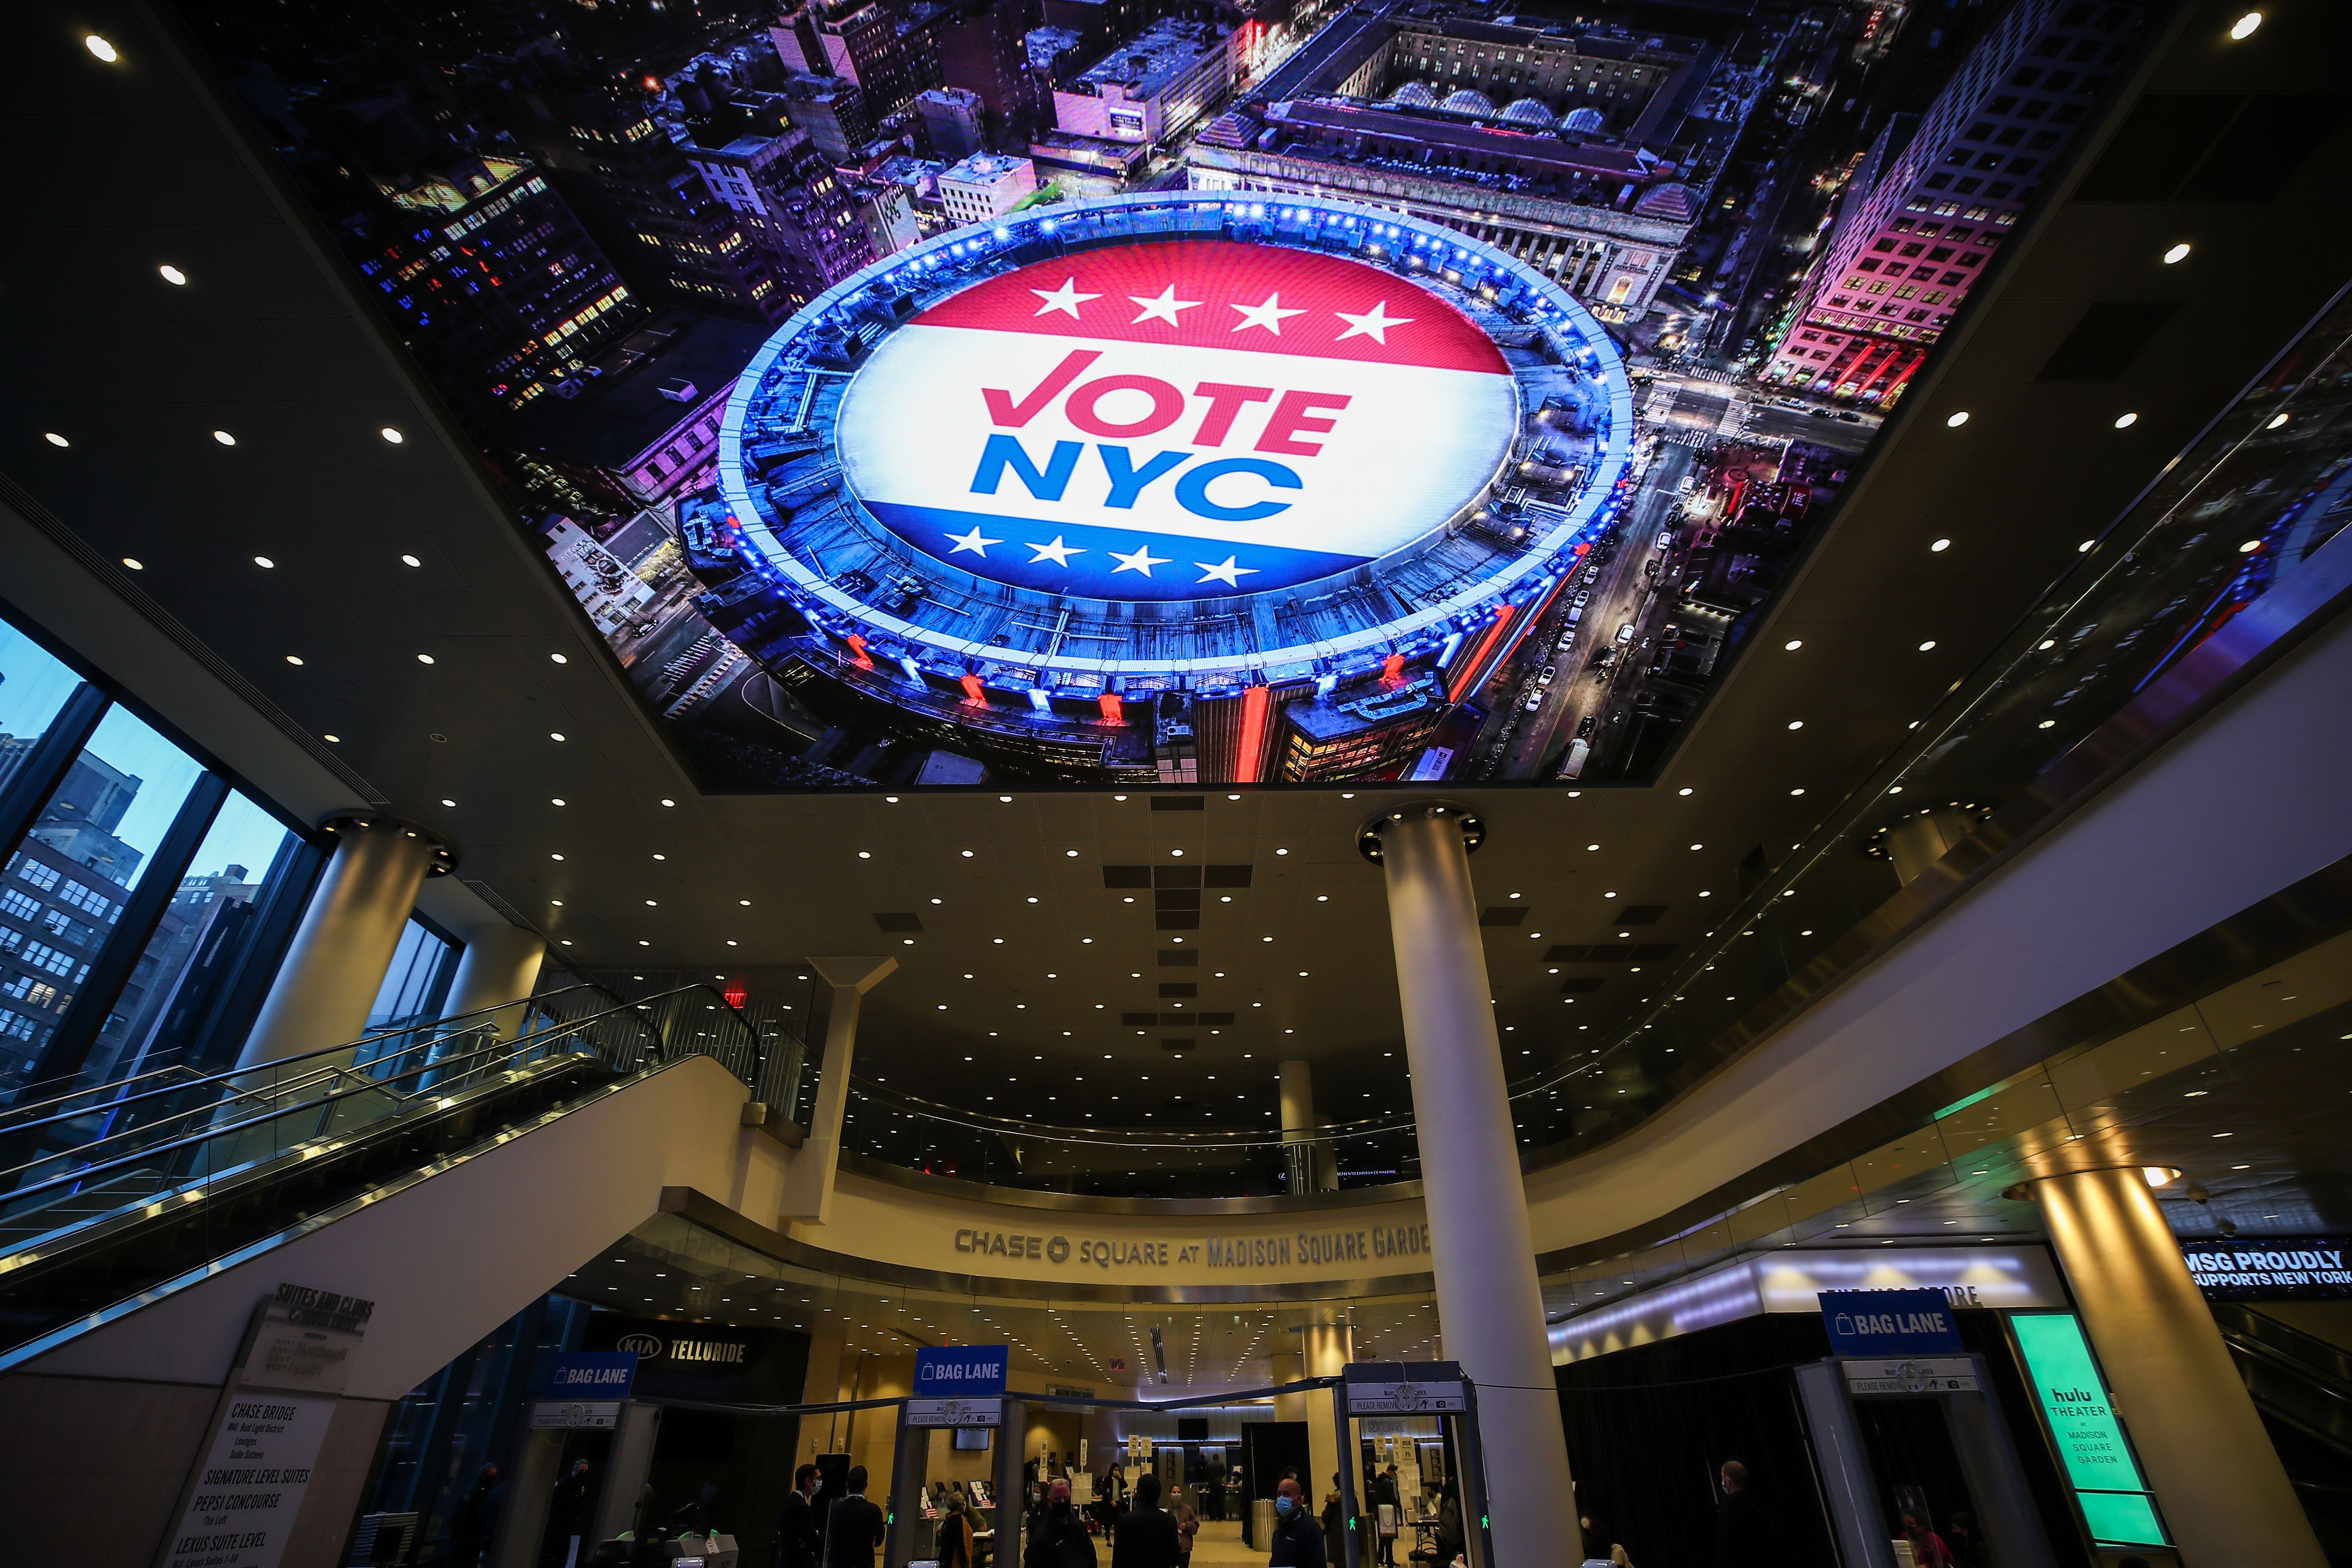 NEW YORK — Madison Square Garden served 60,000 eligible voters for both early voting and Election Day, making it the largest polling site in New York City.